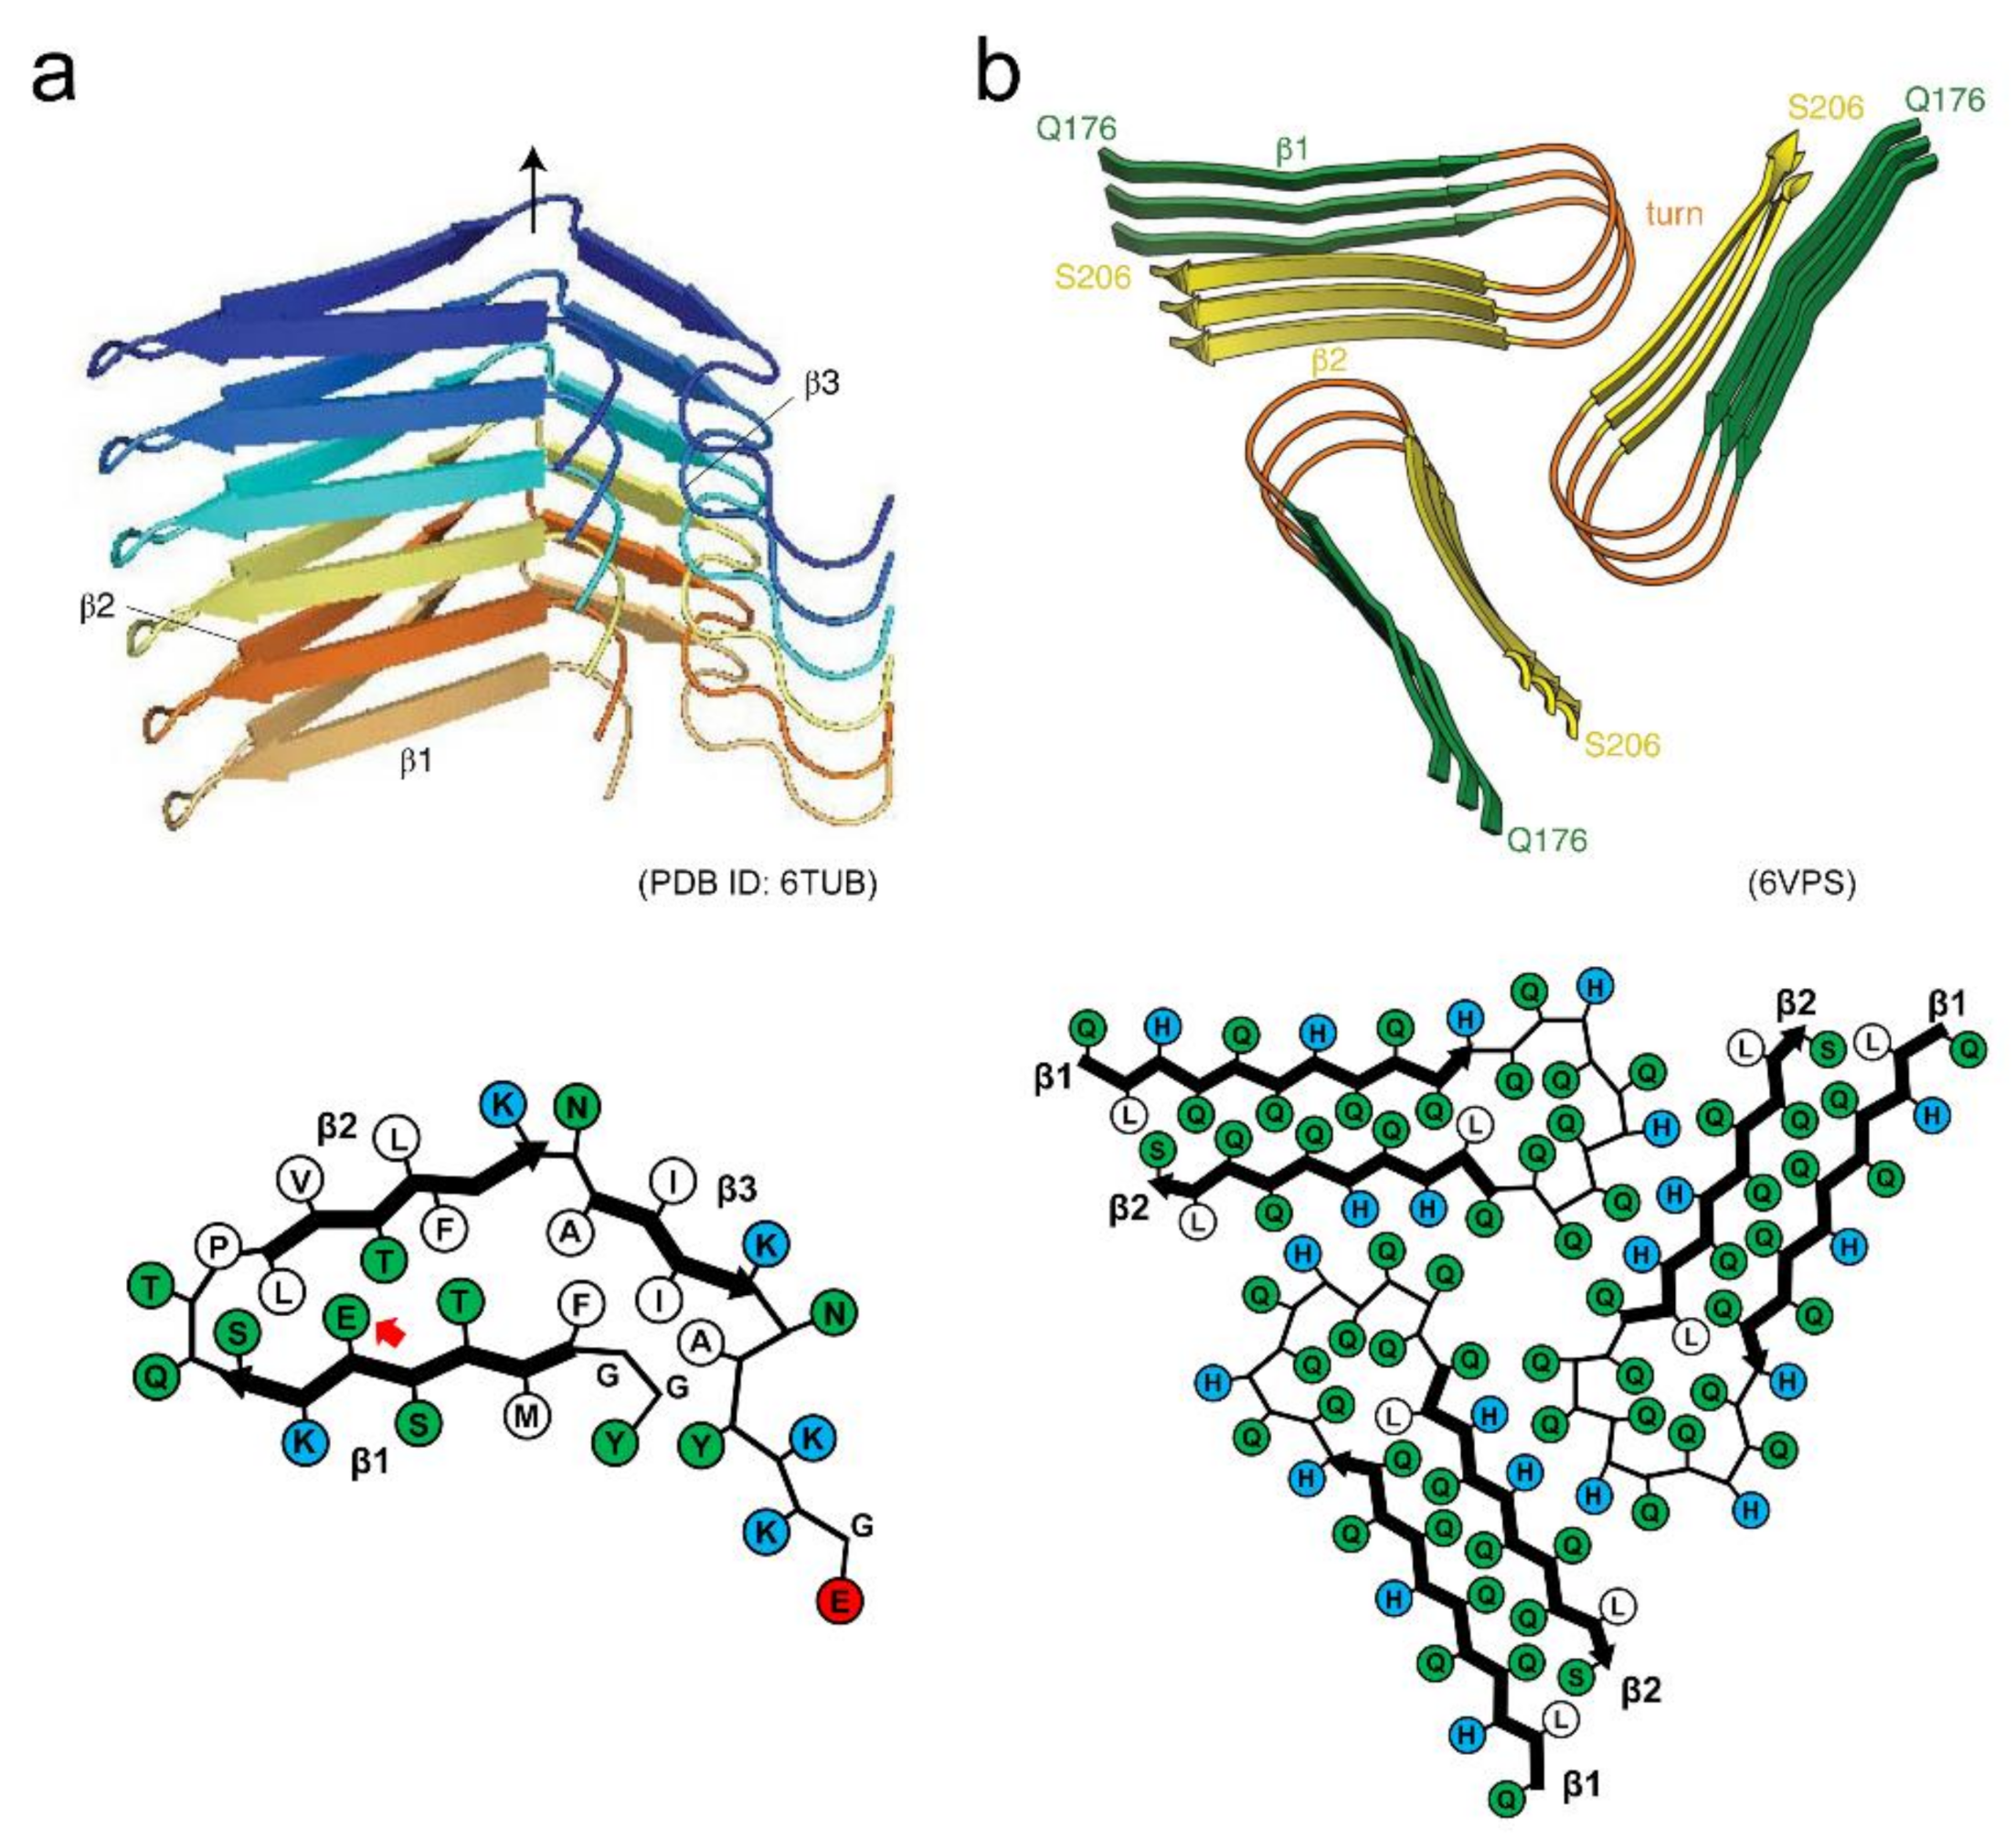 Cross-beta and fibril structure of amyloid fibrils (A) in the fibril